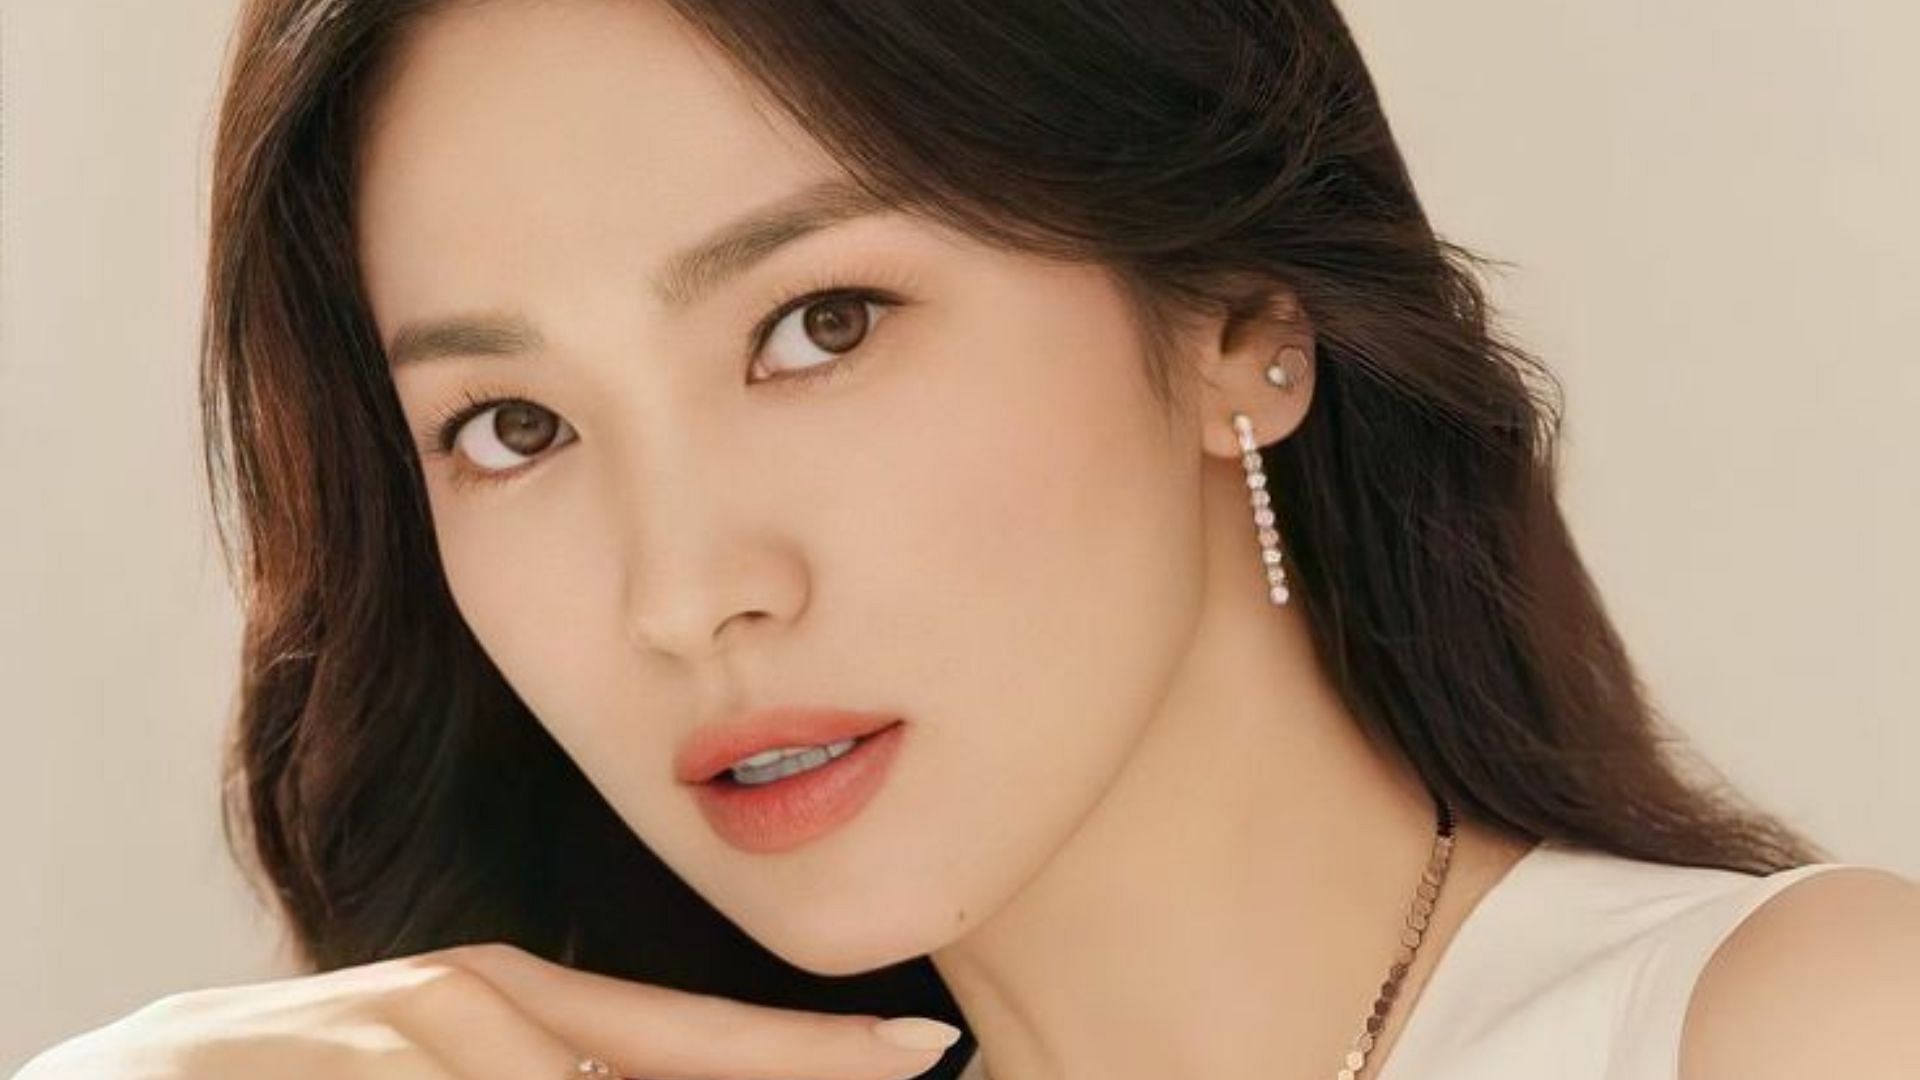 Song Hye-kyo gives a befitting reply to ageist comments (Image via Twitter/@artren_323)